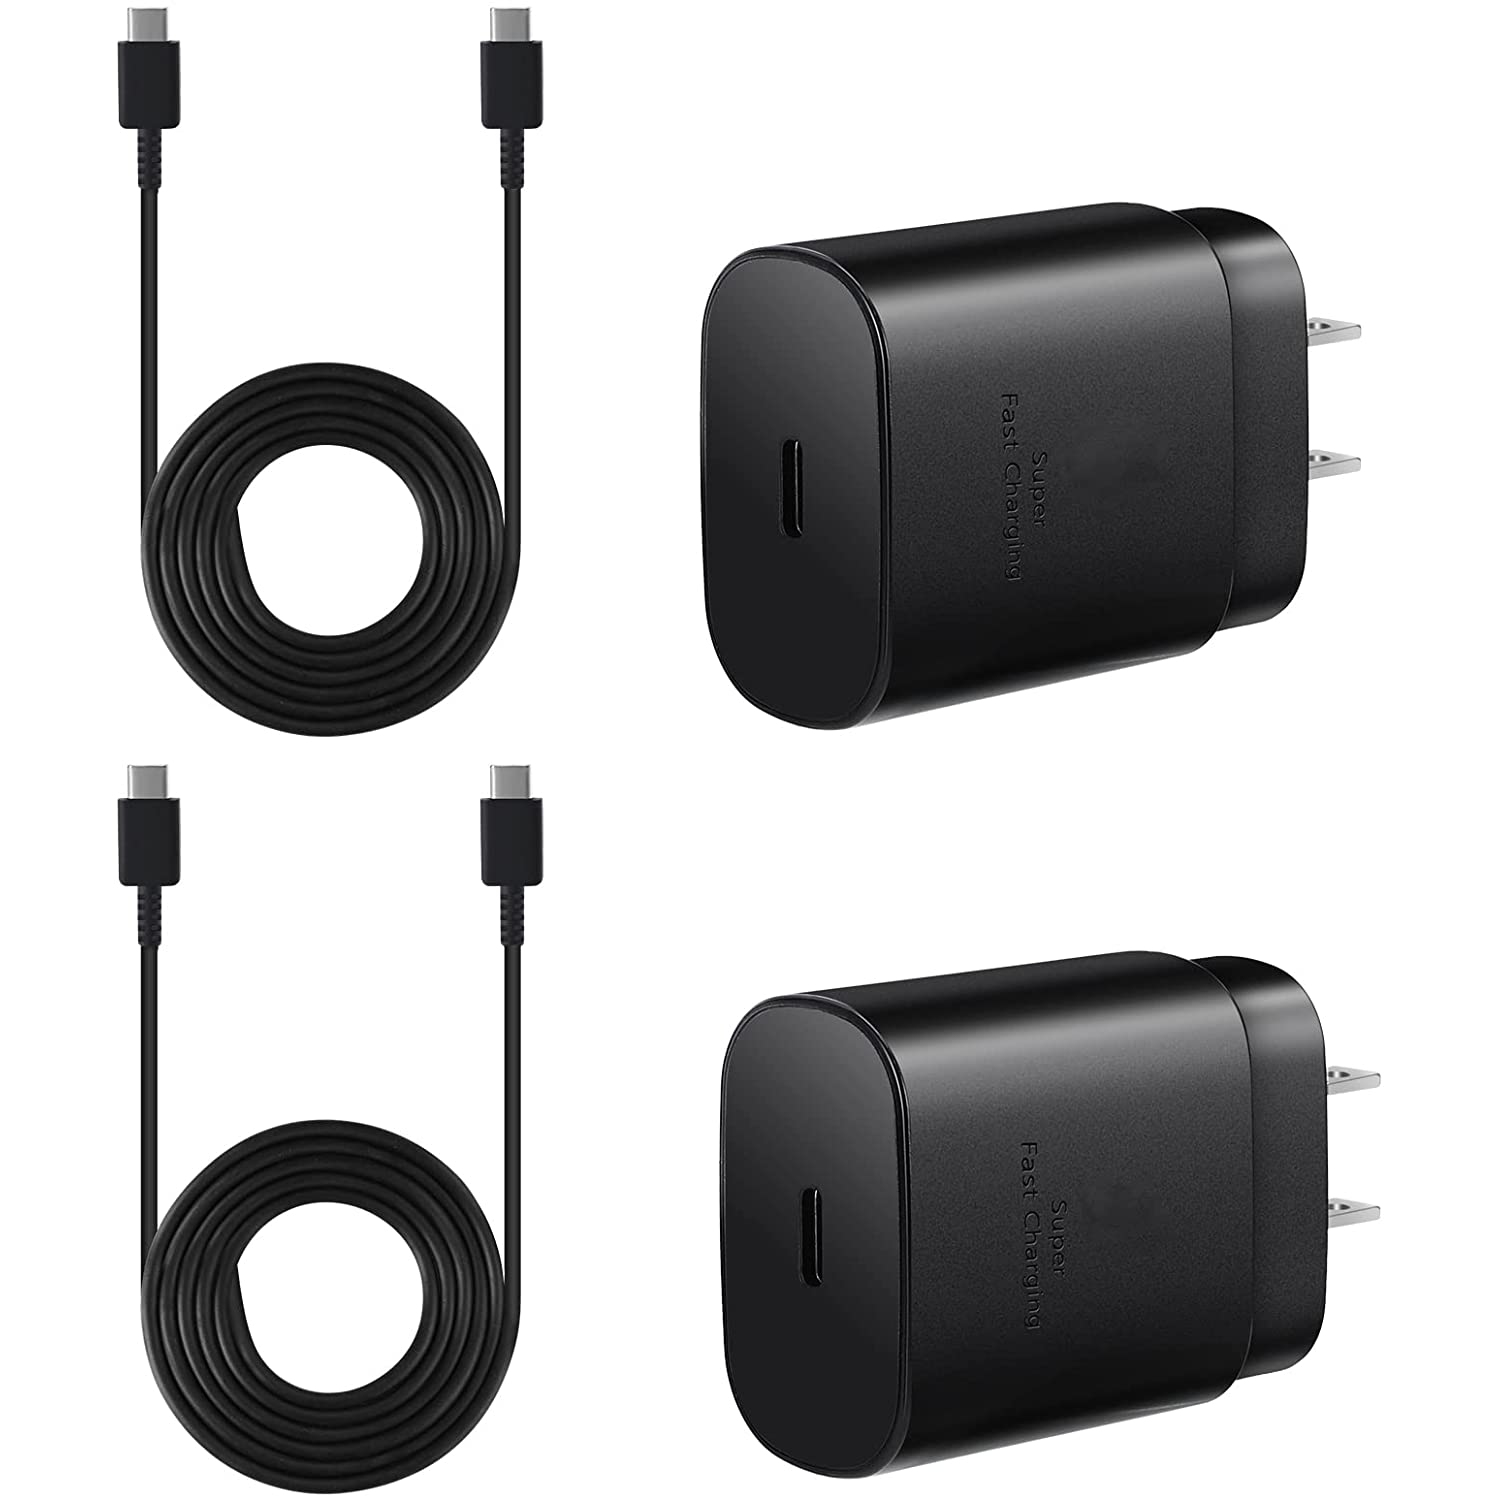 |GA| 2 * USB C 25w fast charger with Usb C to C 6 feet cable| For Android phones| Samsung, LG, Google, Motorola & more| 2 pack